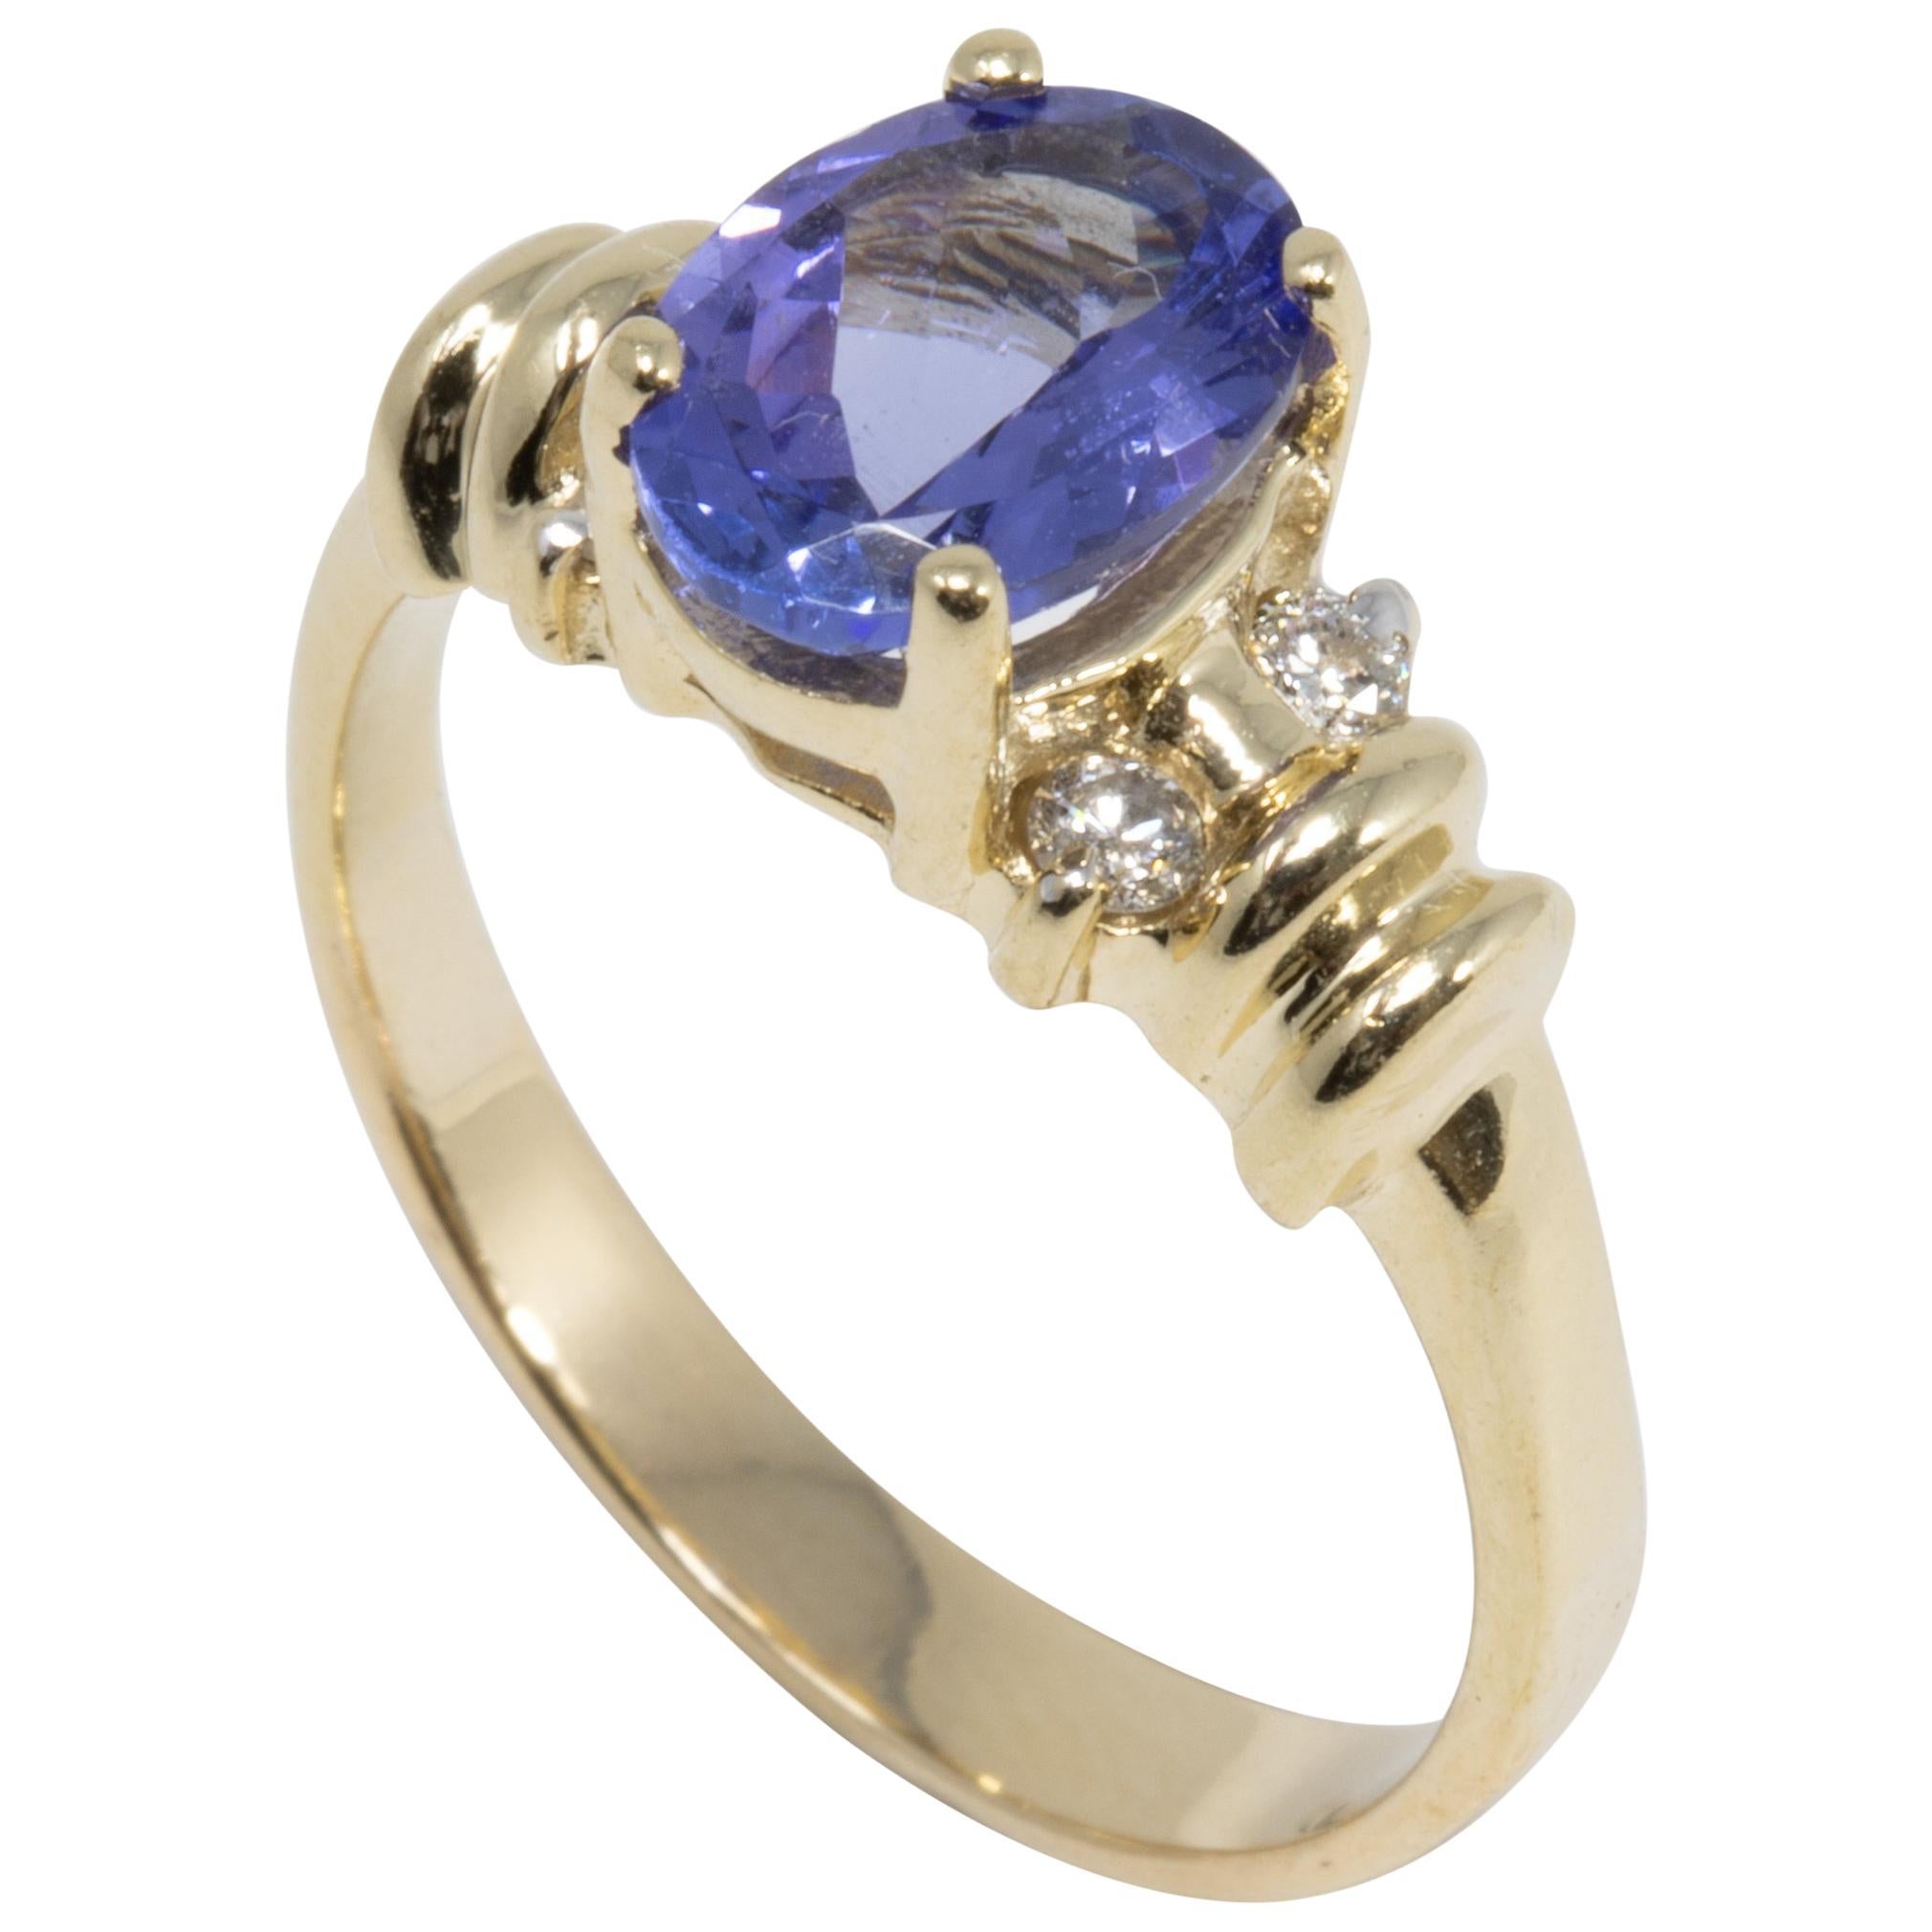 Amethyst and Diamond 14 Karat Yellow Gold Ring, Solitaire Prong Setting